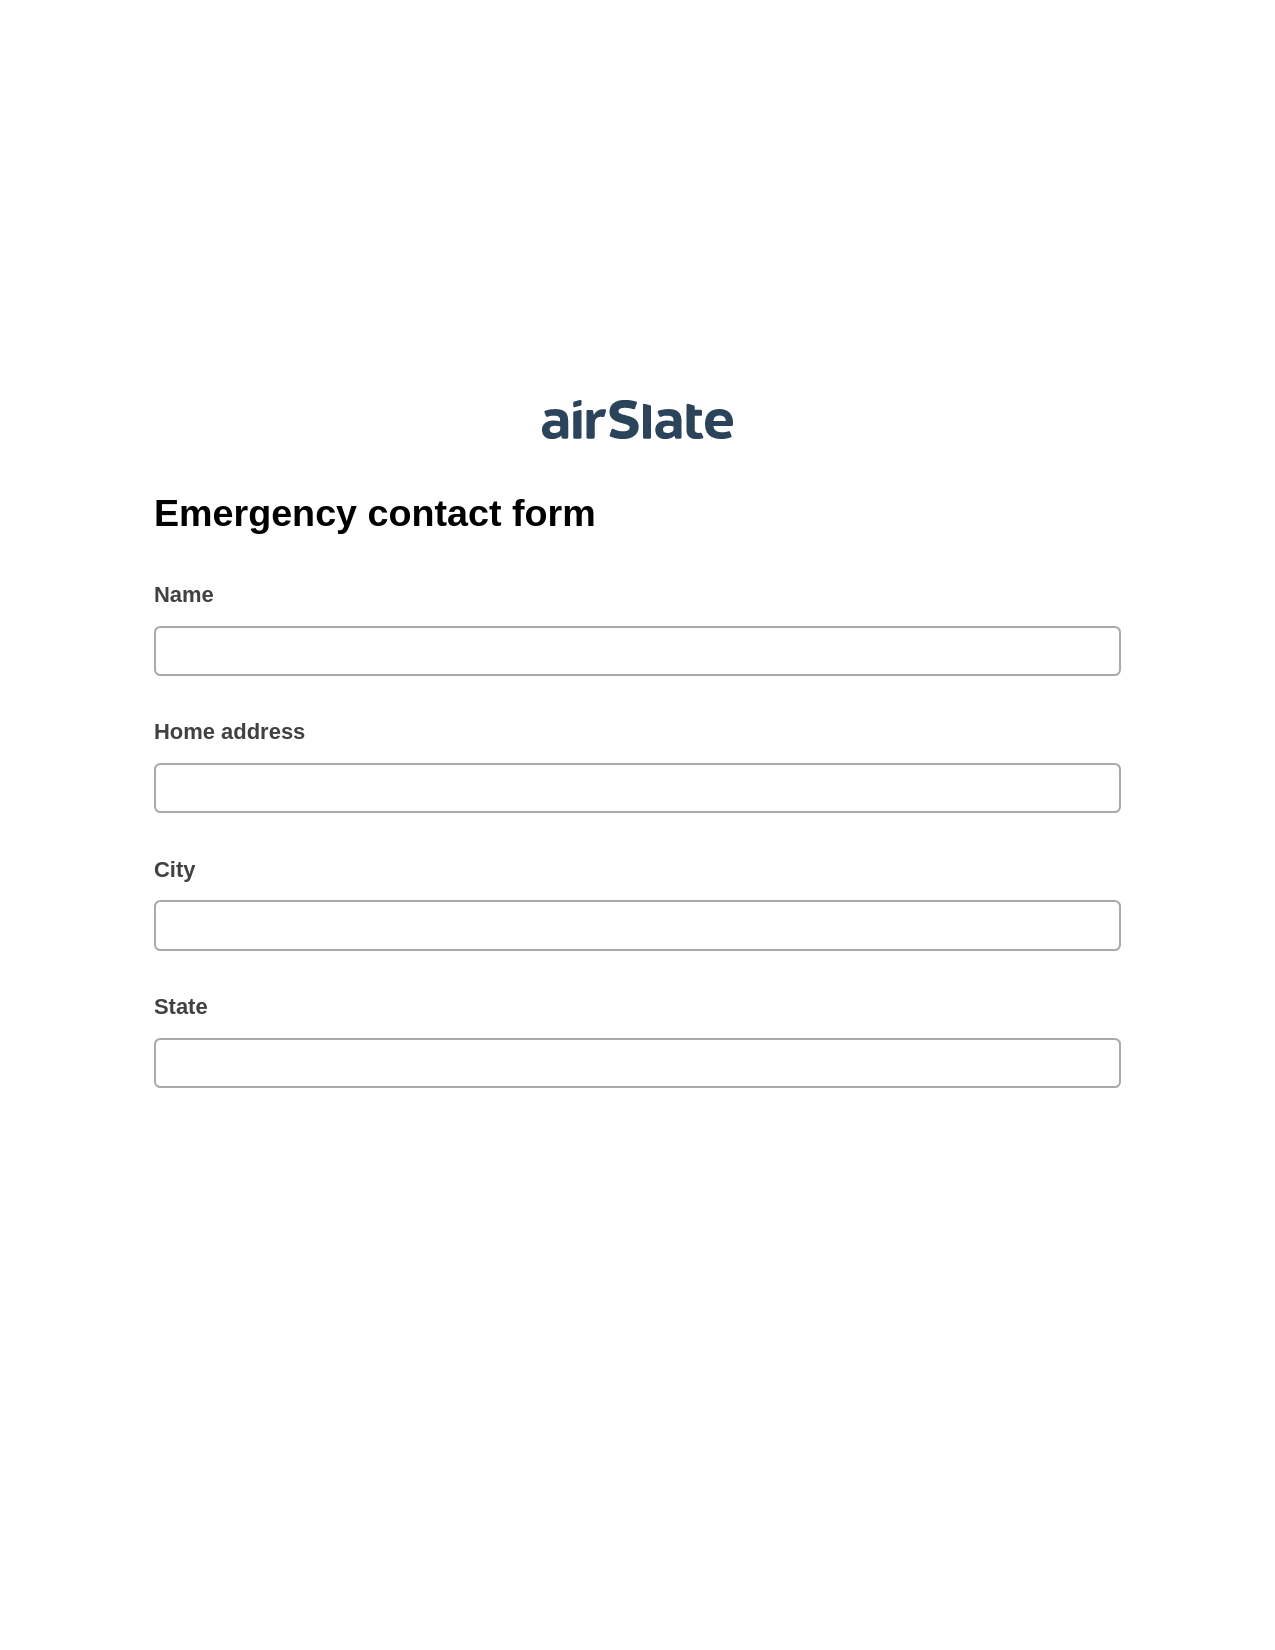 Emergency contact form Pre-fill Dropdown from Airtable, Update MS Dynamics 365 Records Bot, Post-finish Document Bot